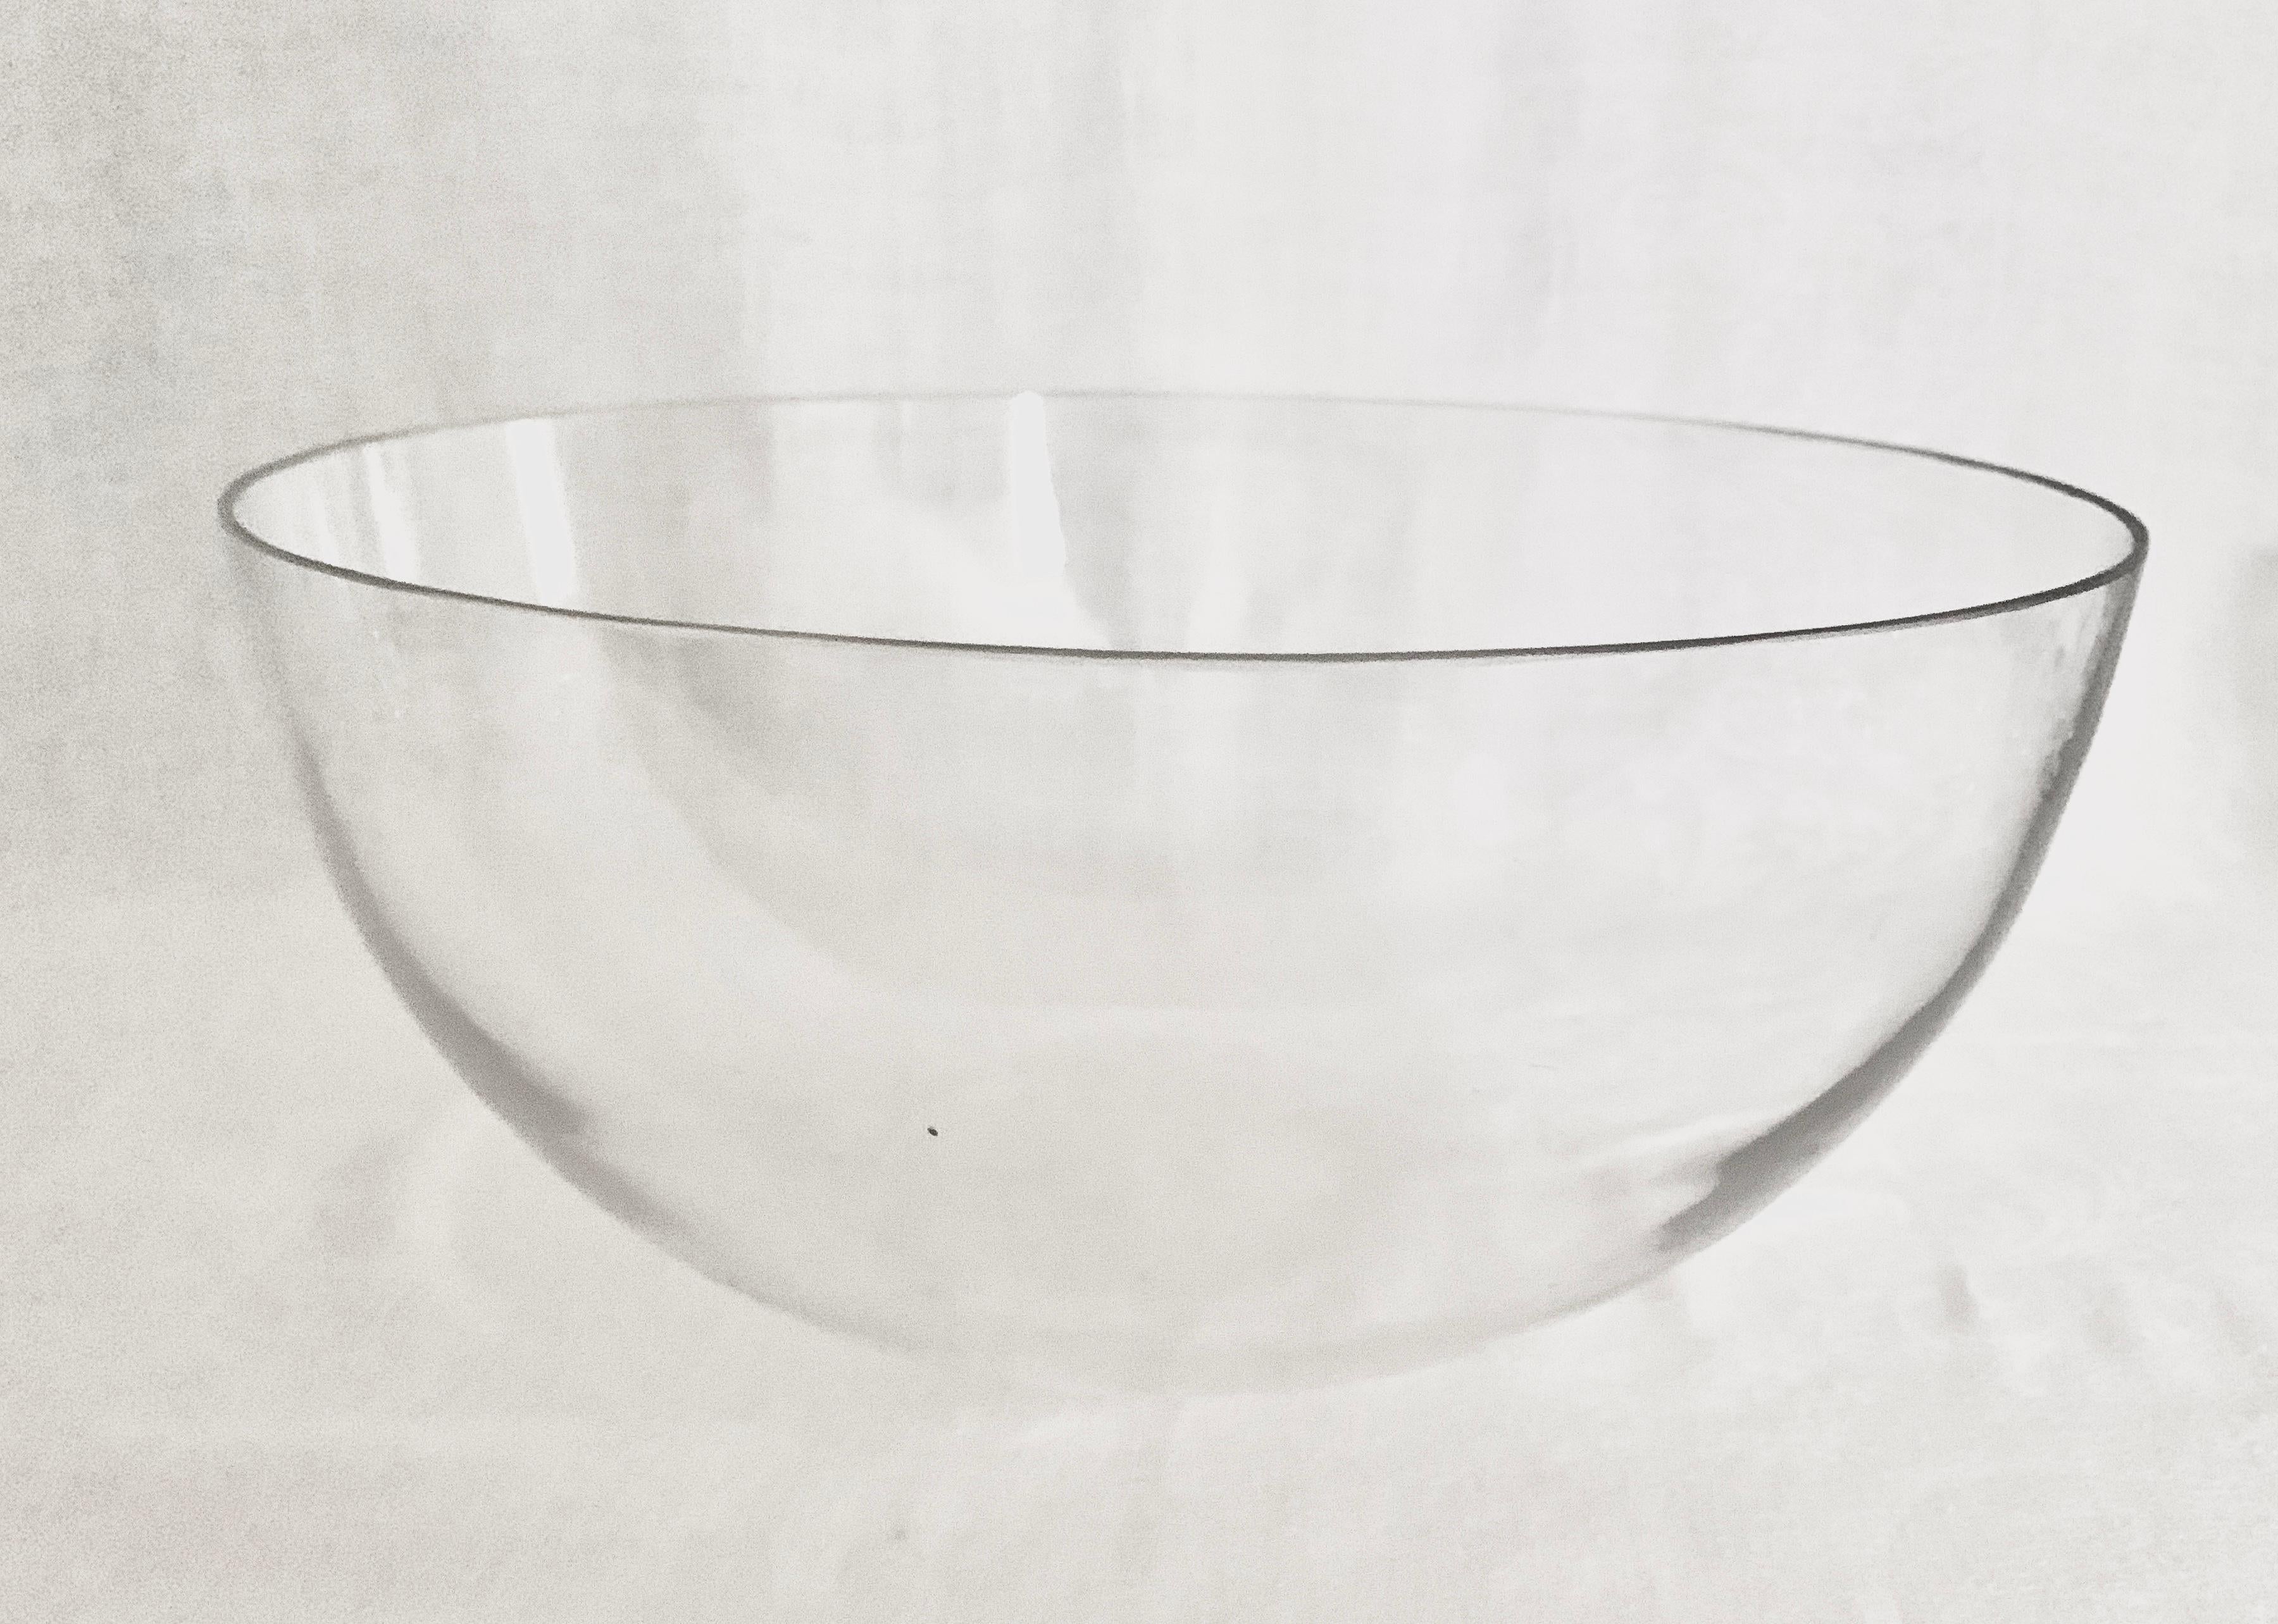 20th Century Fratelli Cacchione Immense Sterling Silver Centerpiece Bowl, Milan, Italy, 1960s For Sale